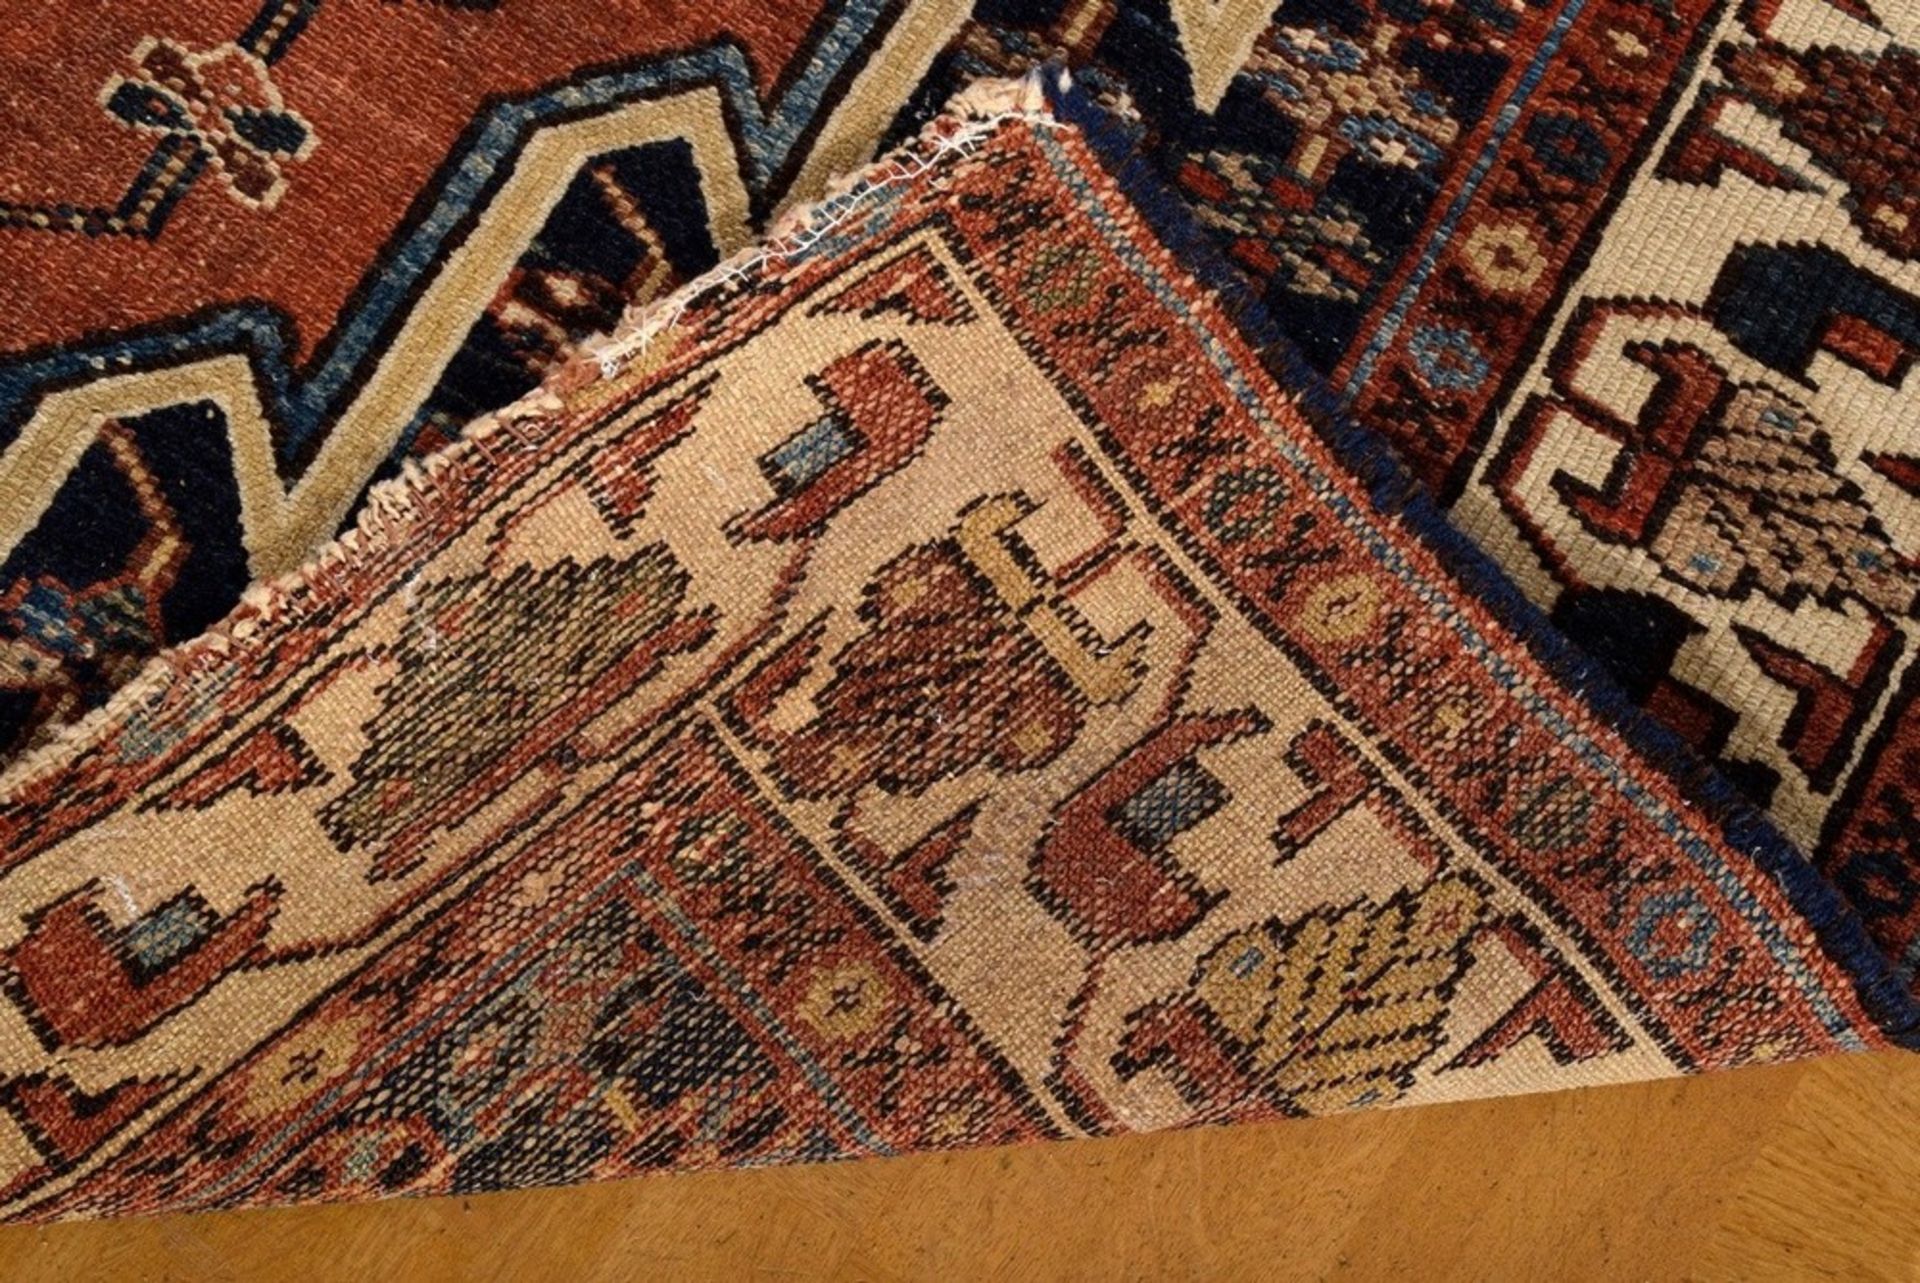 Mazlaghan carpet with typical outline of sharp serrations around the central medallion on a pattern - Image 5 of 6